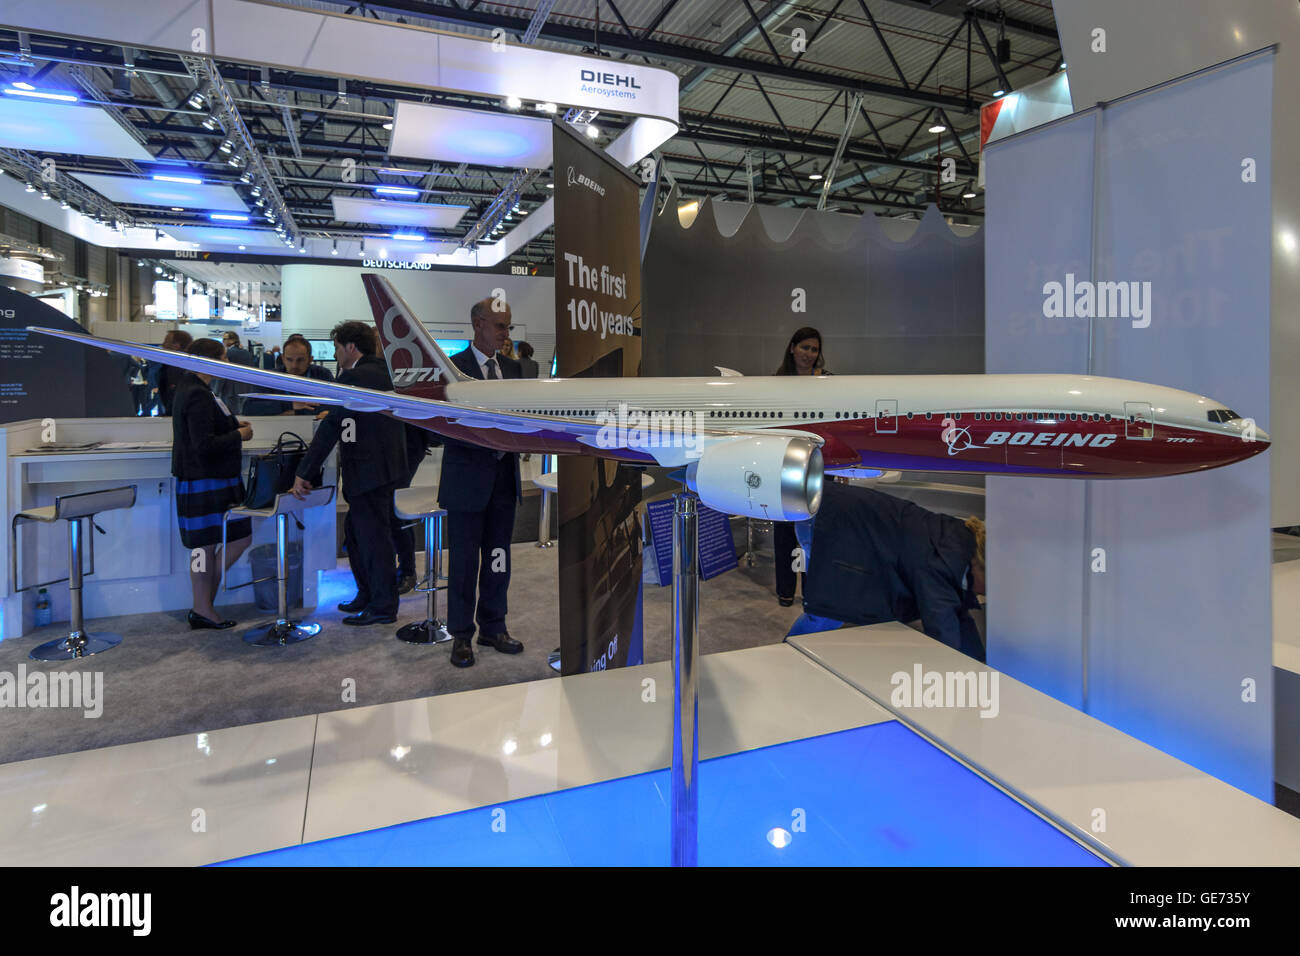 The stand of the Boeing Company. Model of airliner Boeing 787-8 Dreamliner. Stock Photo